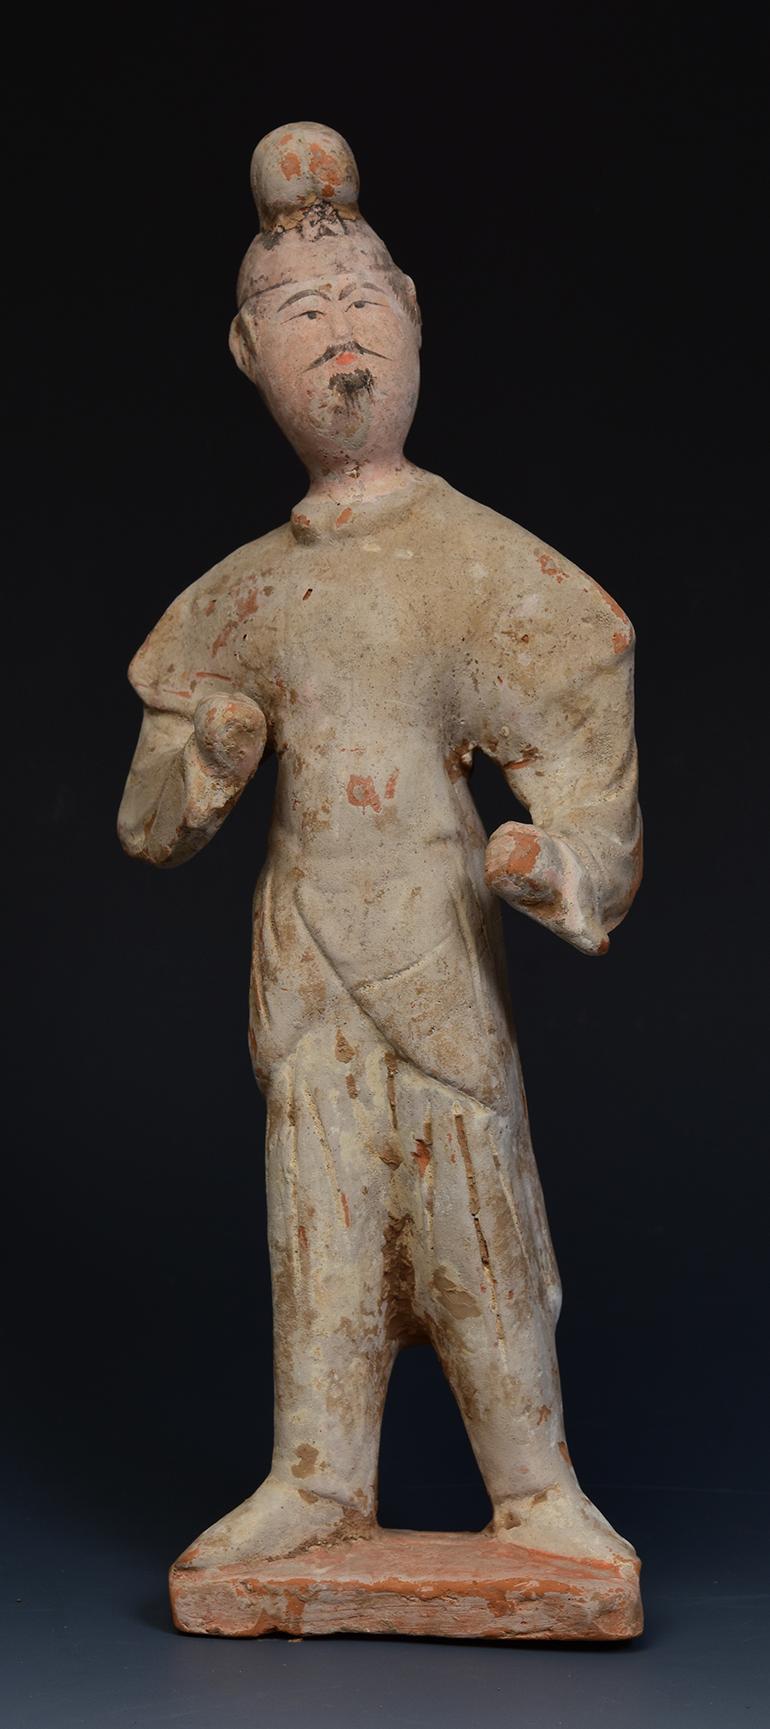 Chinese pottery standing groom figurine.

Age: China, Tang Dynasty, A.D. 618 - 907
Size: Height 27 C.M. / Width 10 C.M. / Thickness 5.7 C.M. (size excluding stand)
Condition: Well-preserved old burial condition overall with some amount of soil